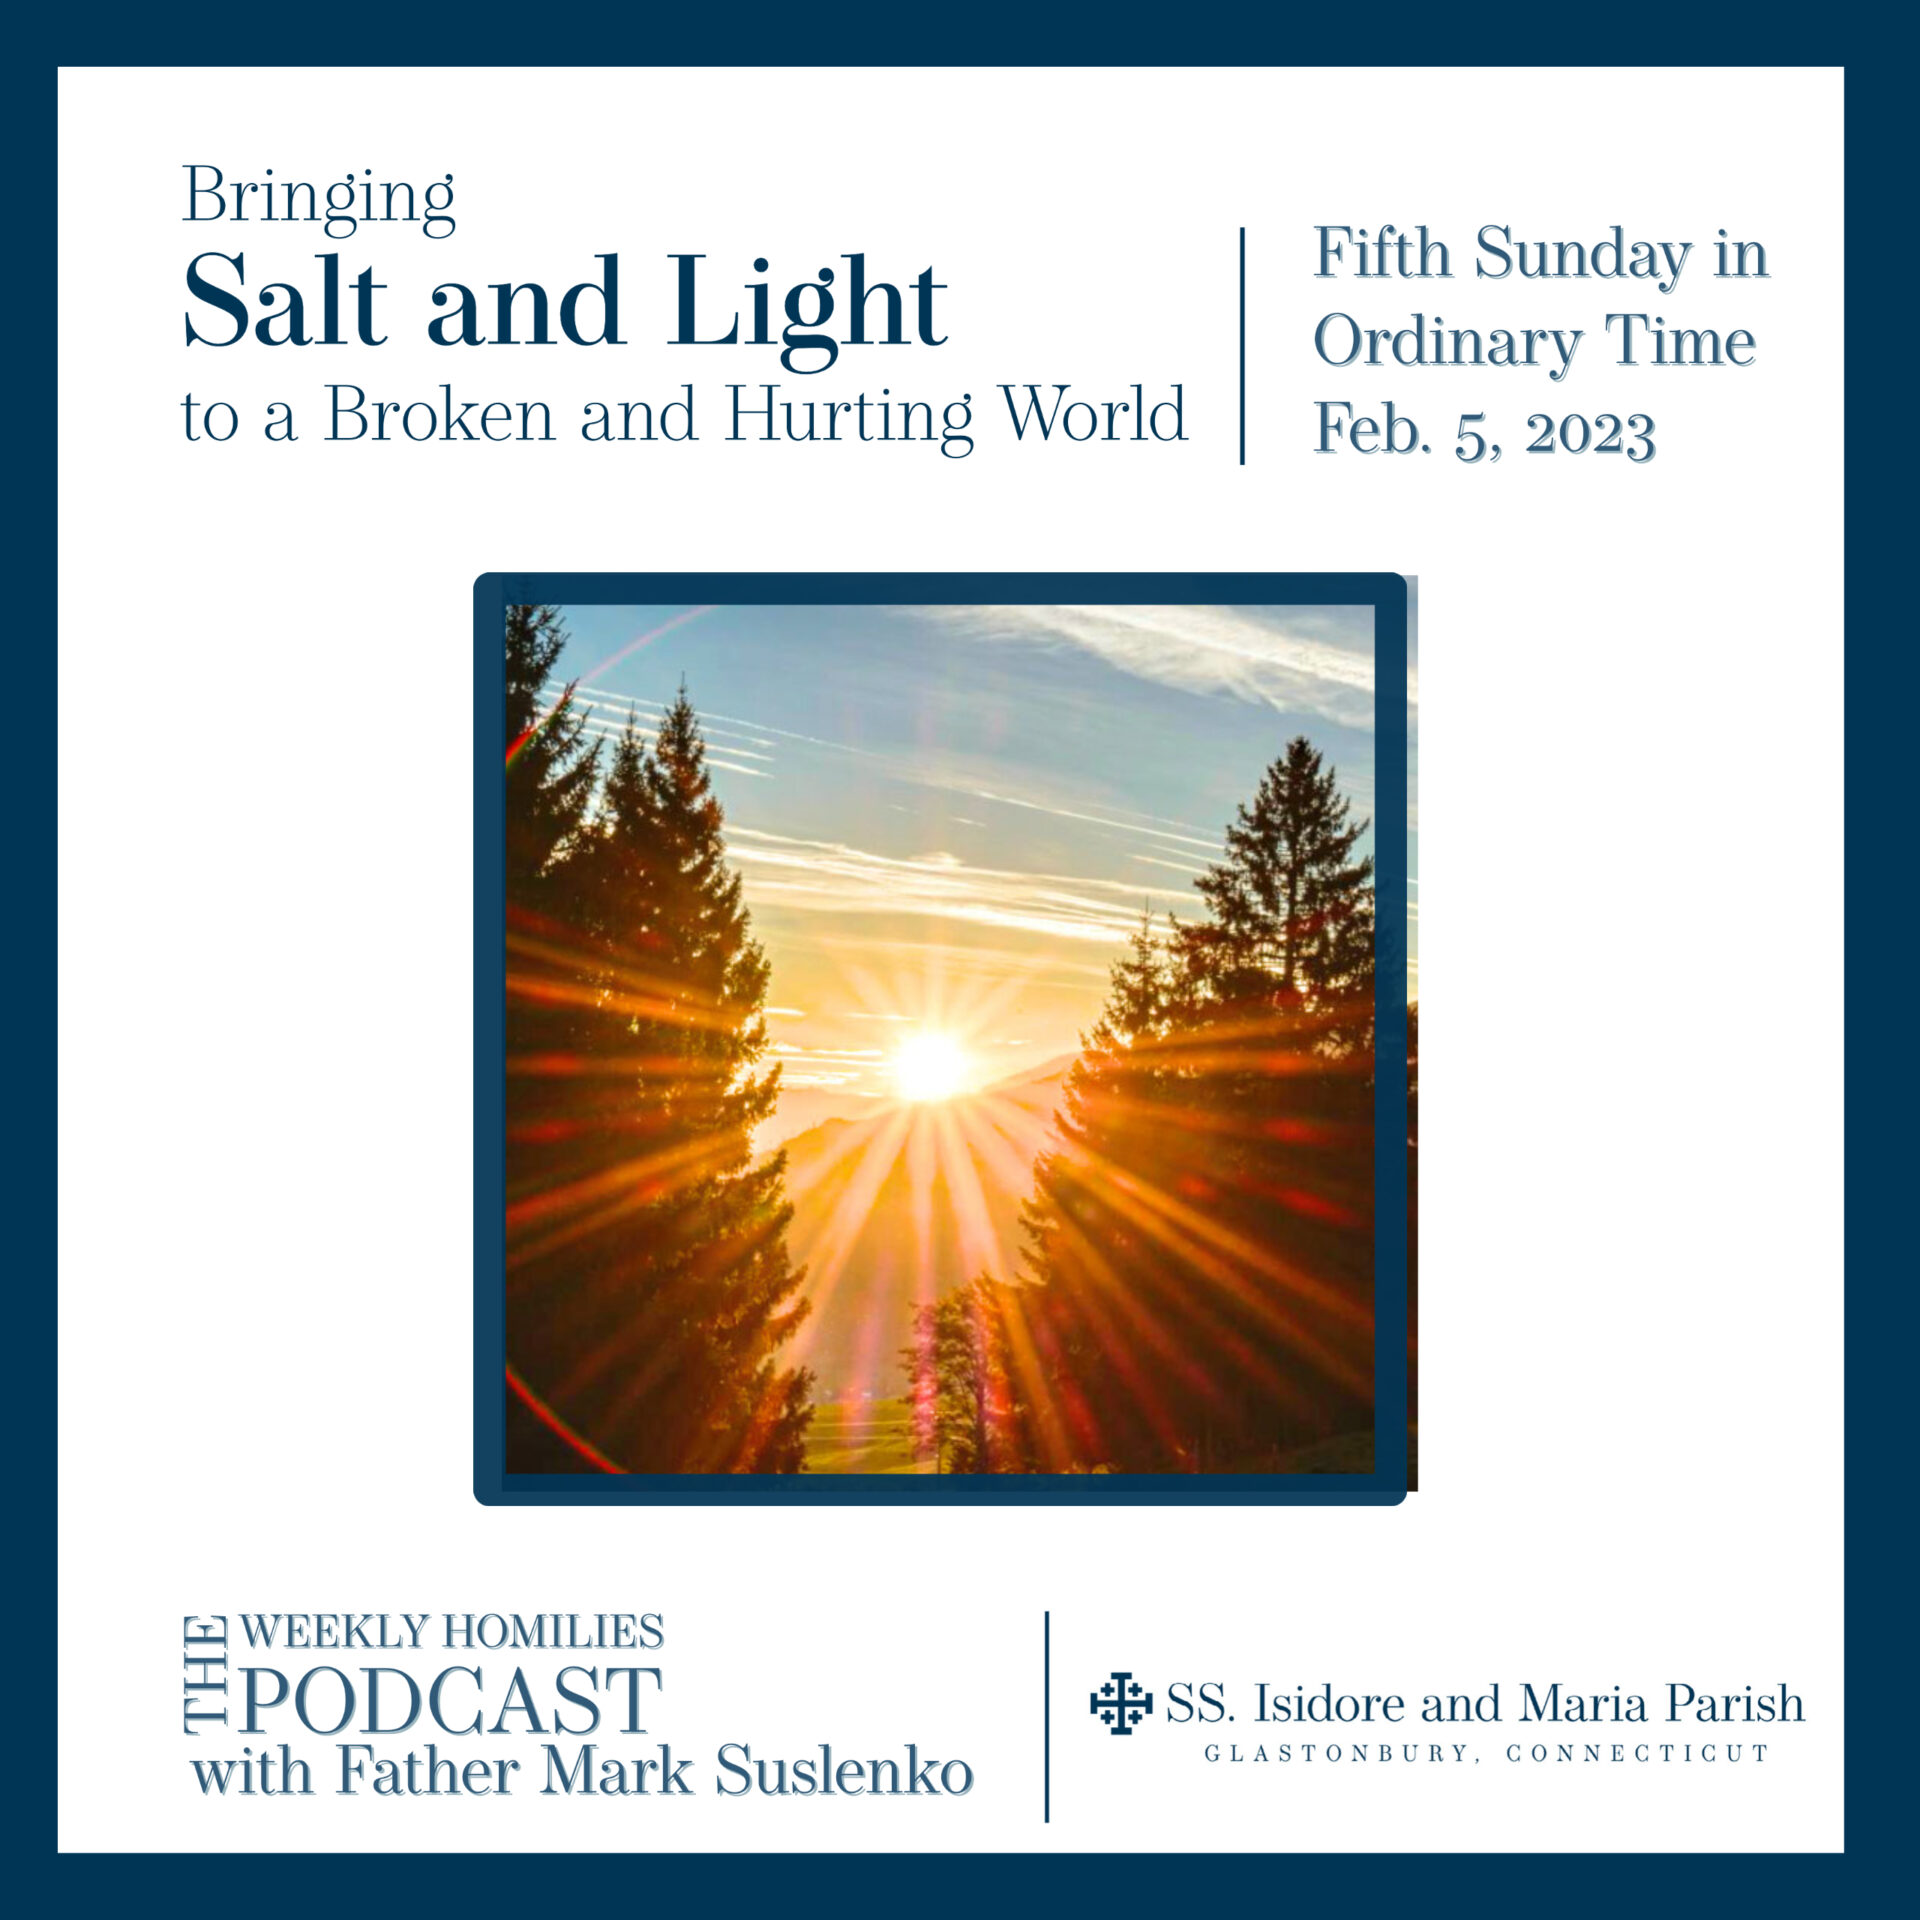 PODCAST: Bringing Salt and Light to a Broken and Hurting World